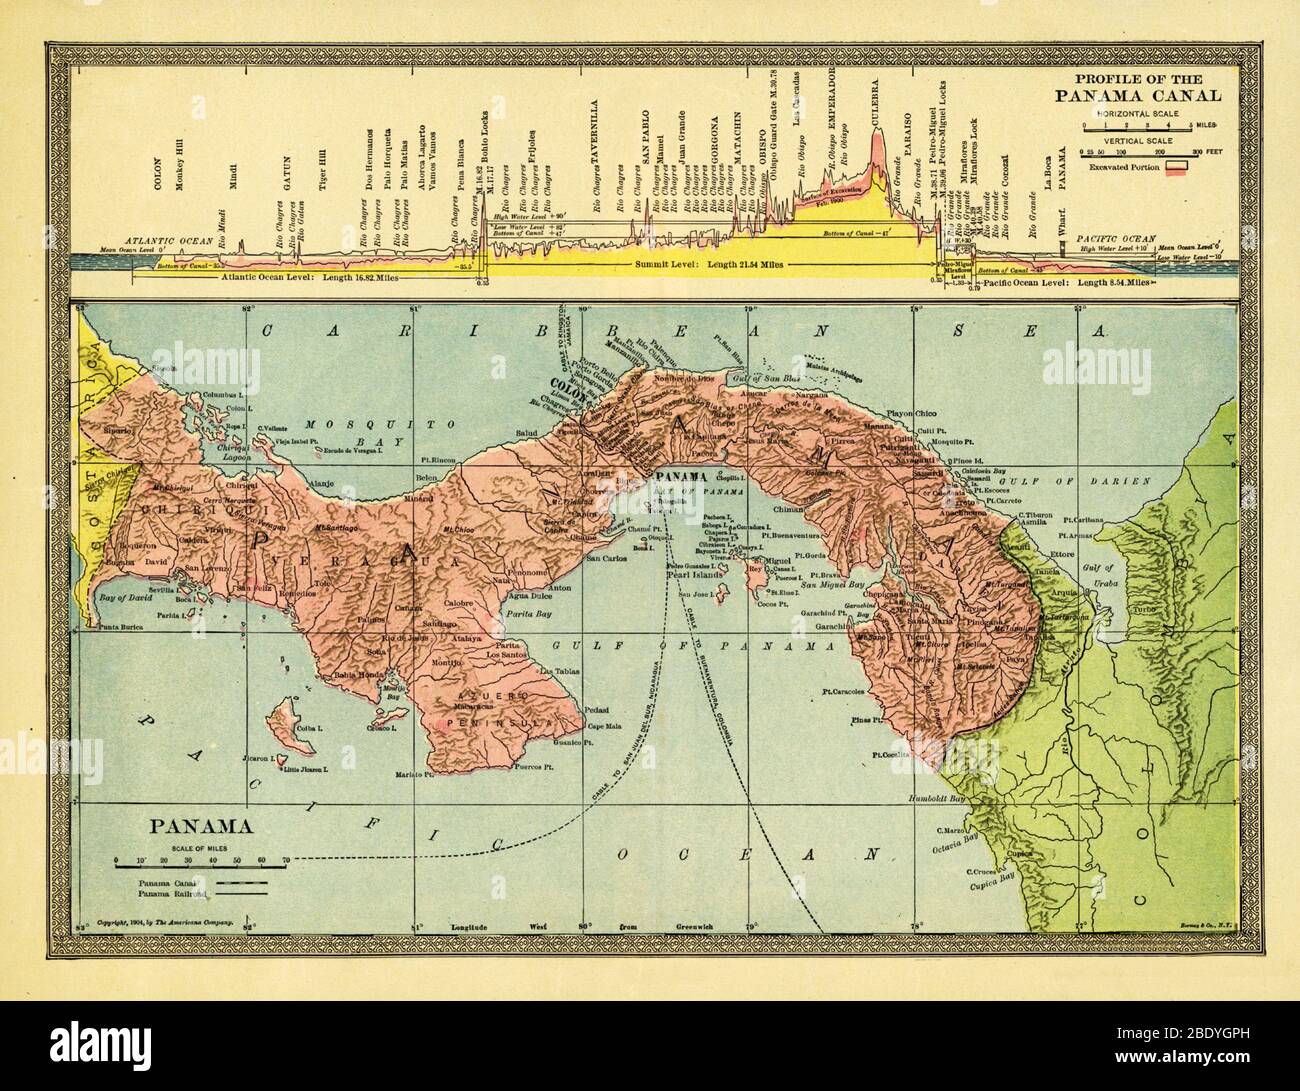 Map of Panama Showing Canal, 1904 Stock Photo